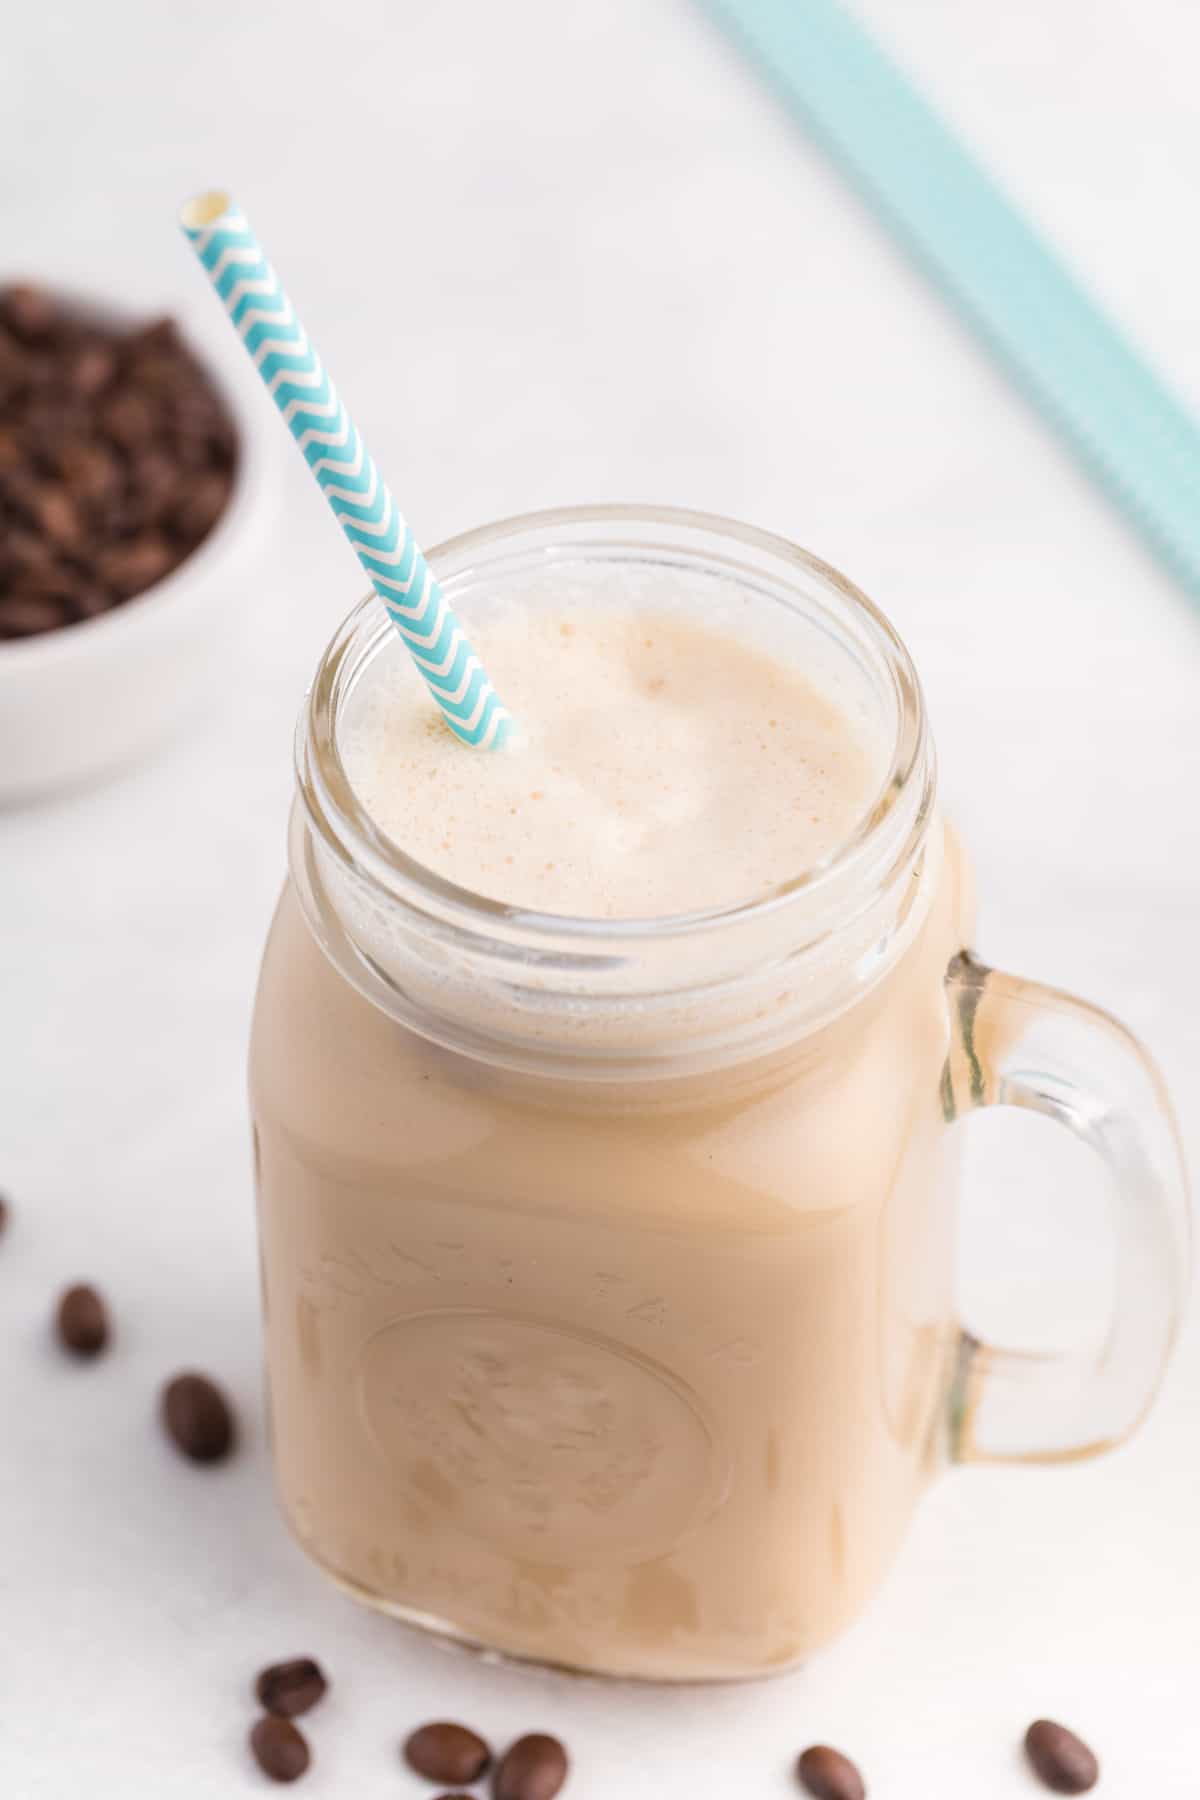 An iced coffee in a glass with a straw.